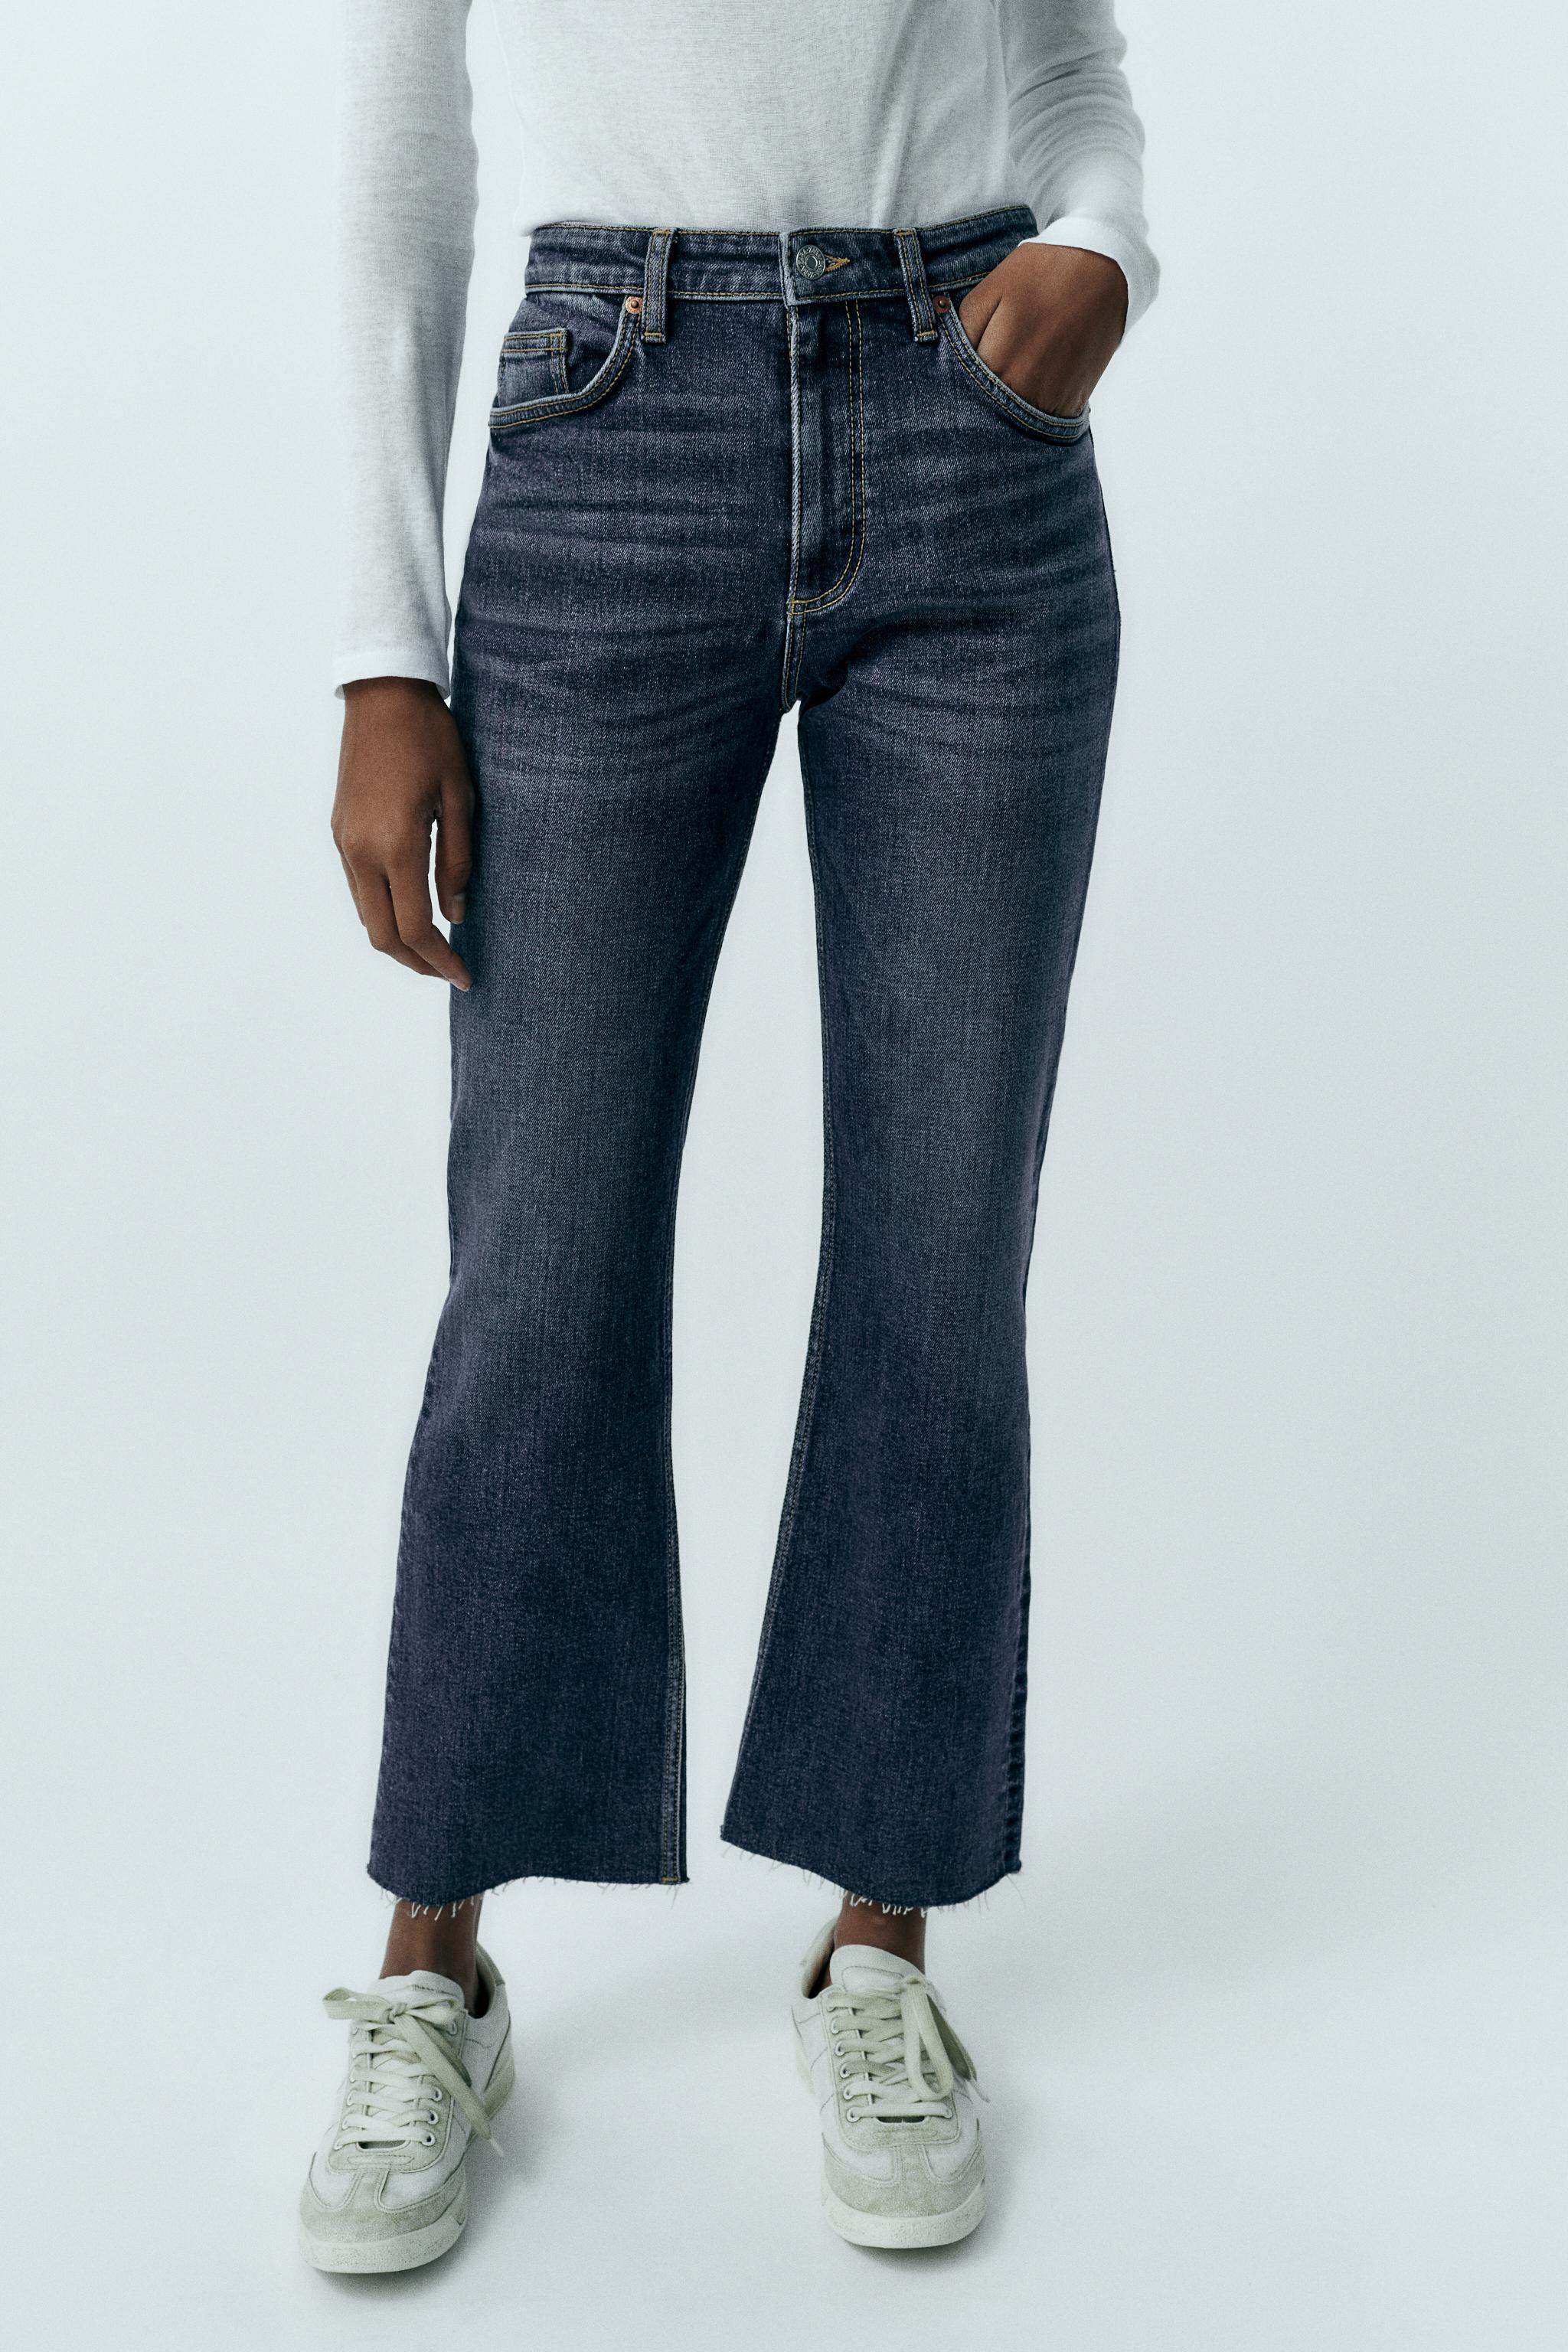 TRF MID-RISE FLARE CROPPED JEANS - Navy blue